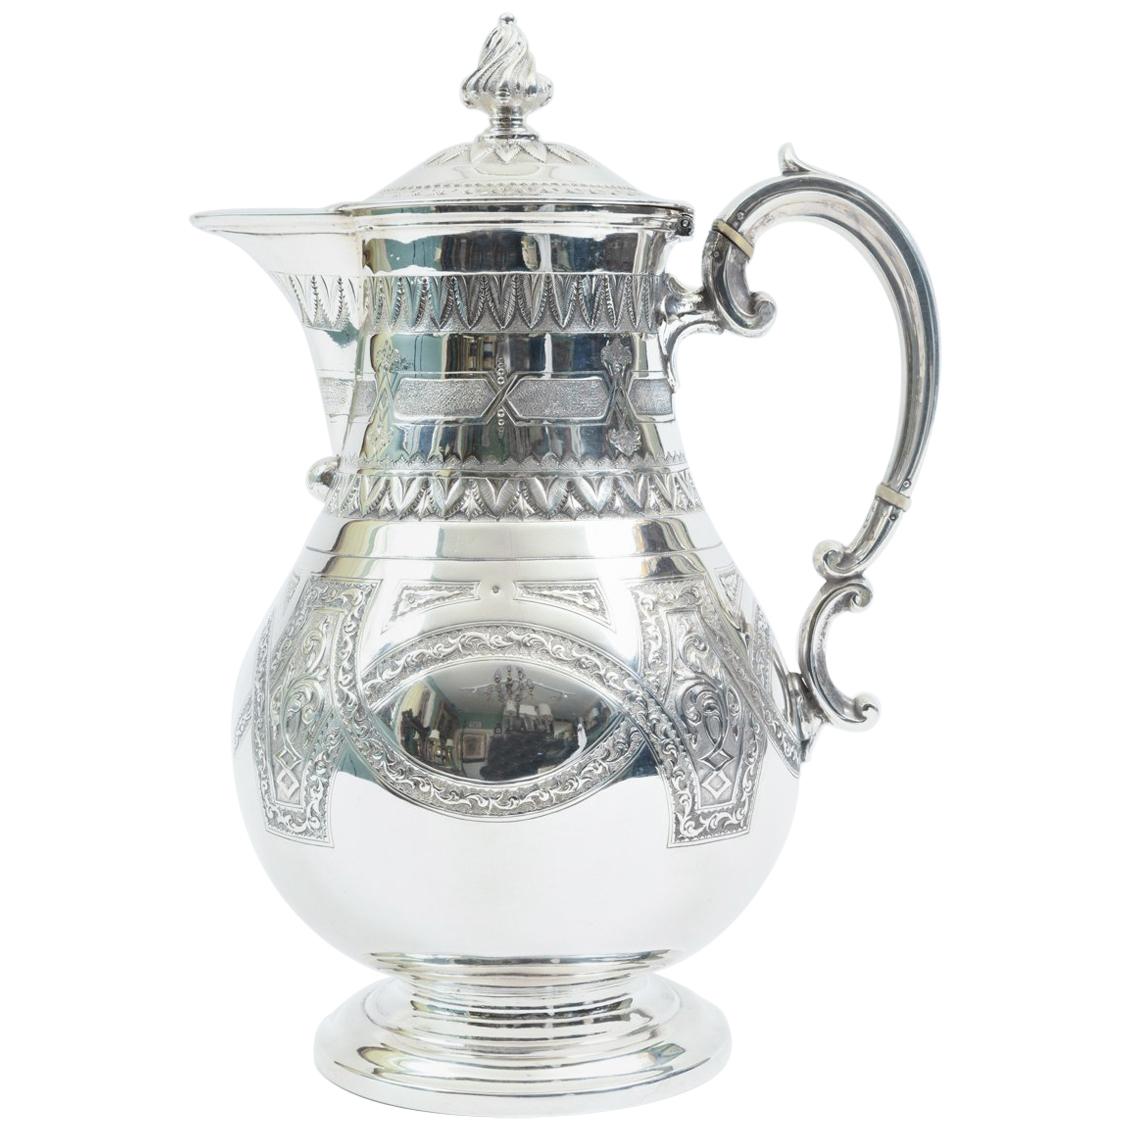 Ornate Exterior Design Details English Silver Plate Tea or Coffee Pot